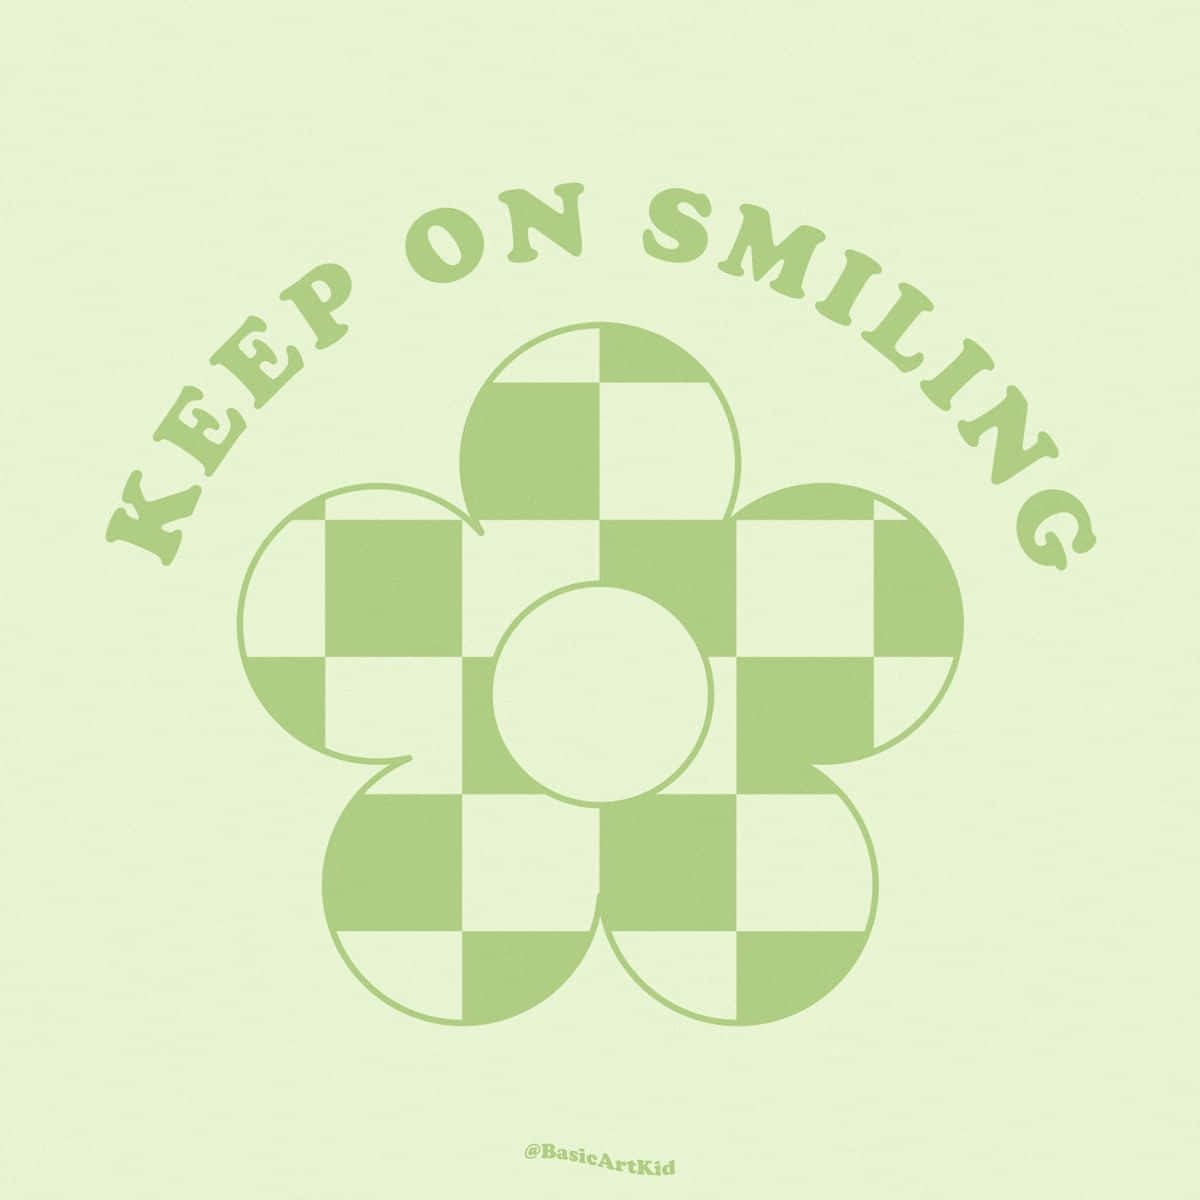 Keep On Smiling - Green Checkered Checkered Background